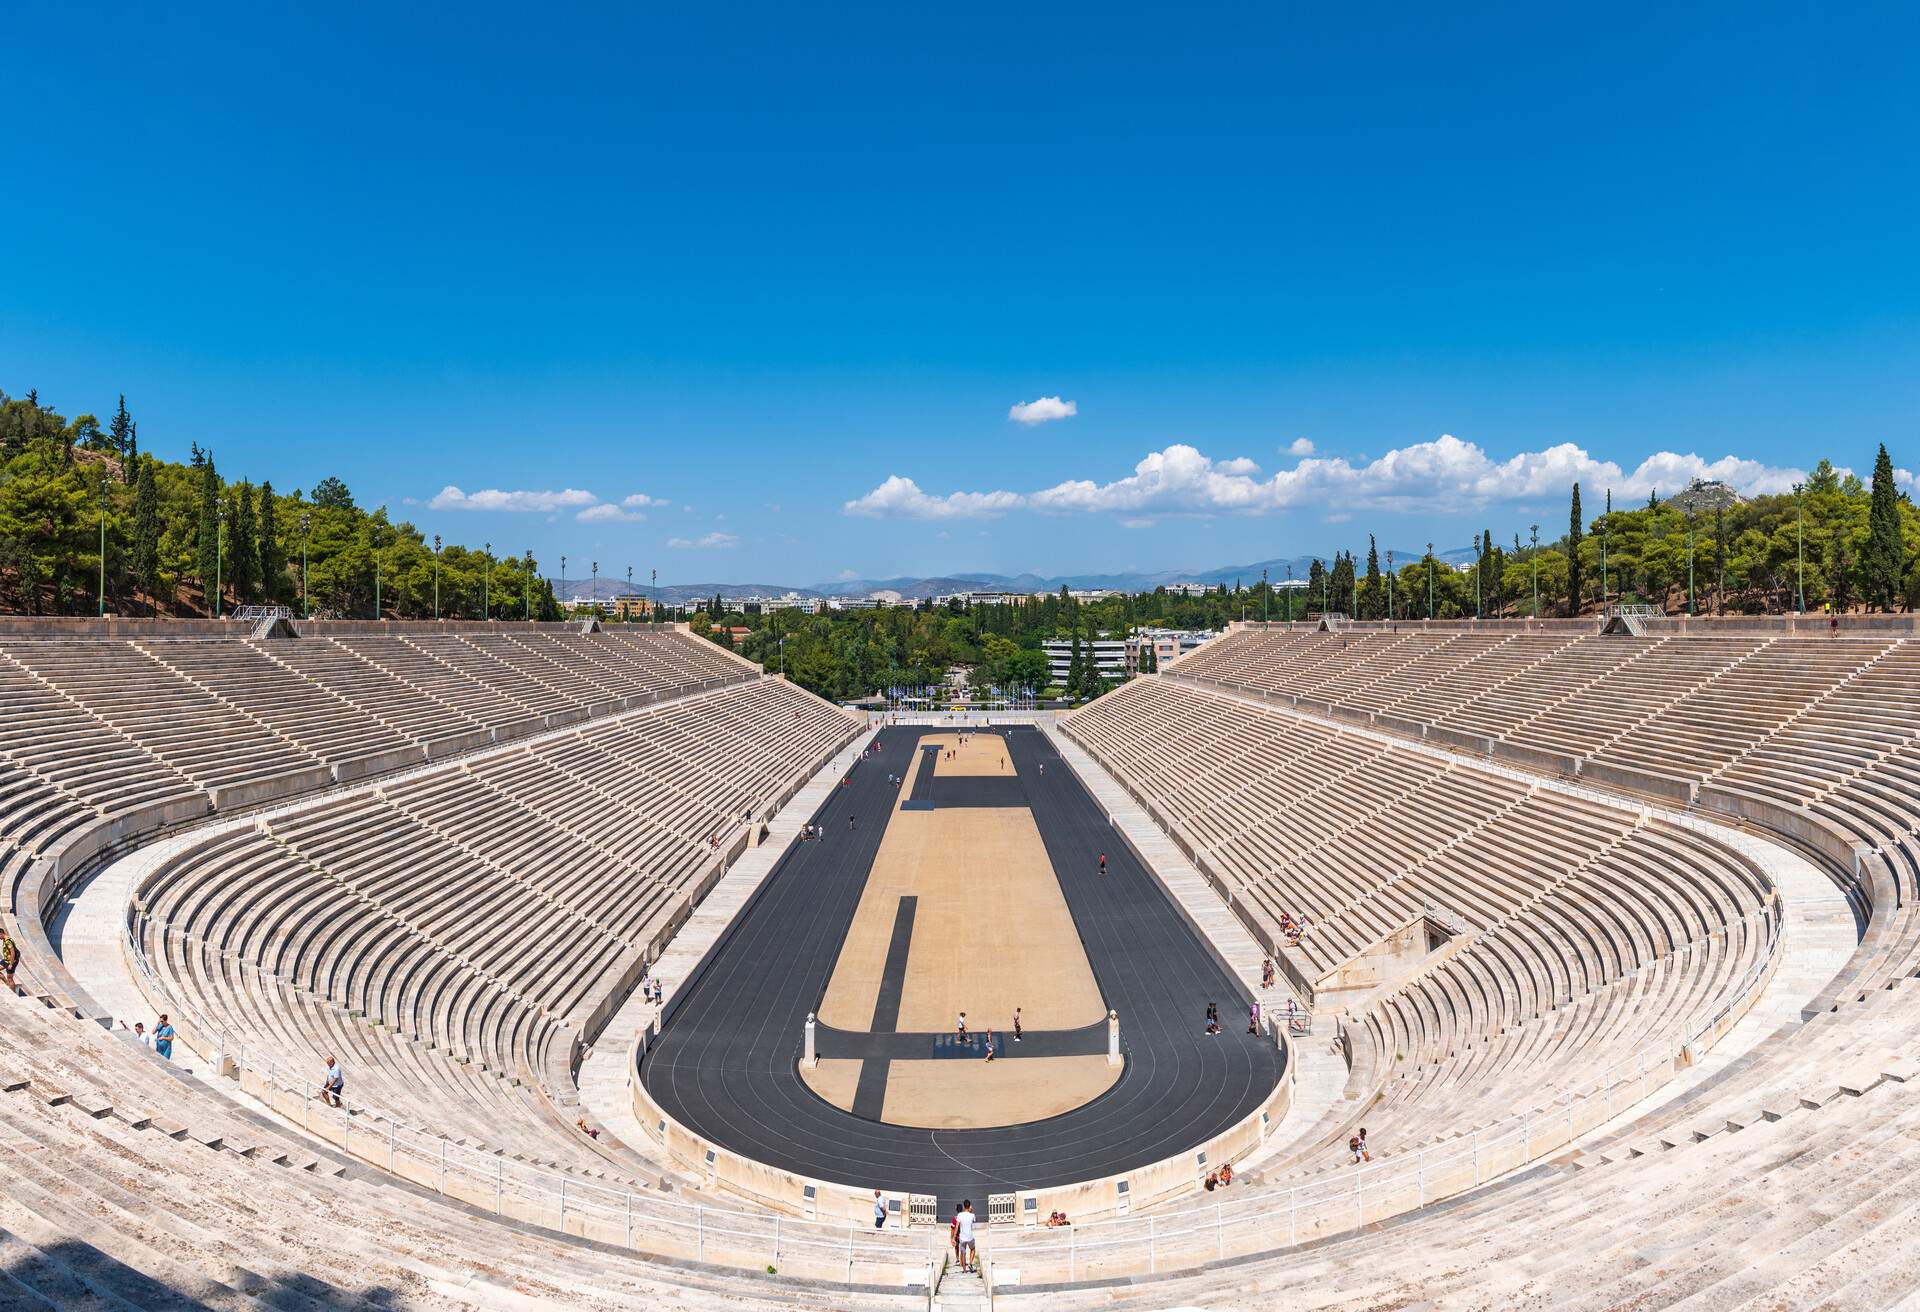 This is a photo of the Panathenaic stadium, the site of the first modern Olympic games which took place in 1896.It is the only stadium in the world built entirely from marble.